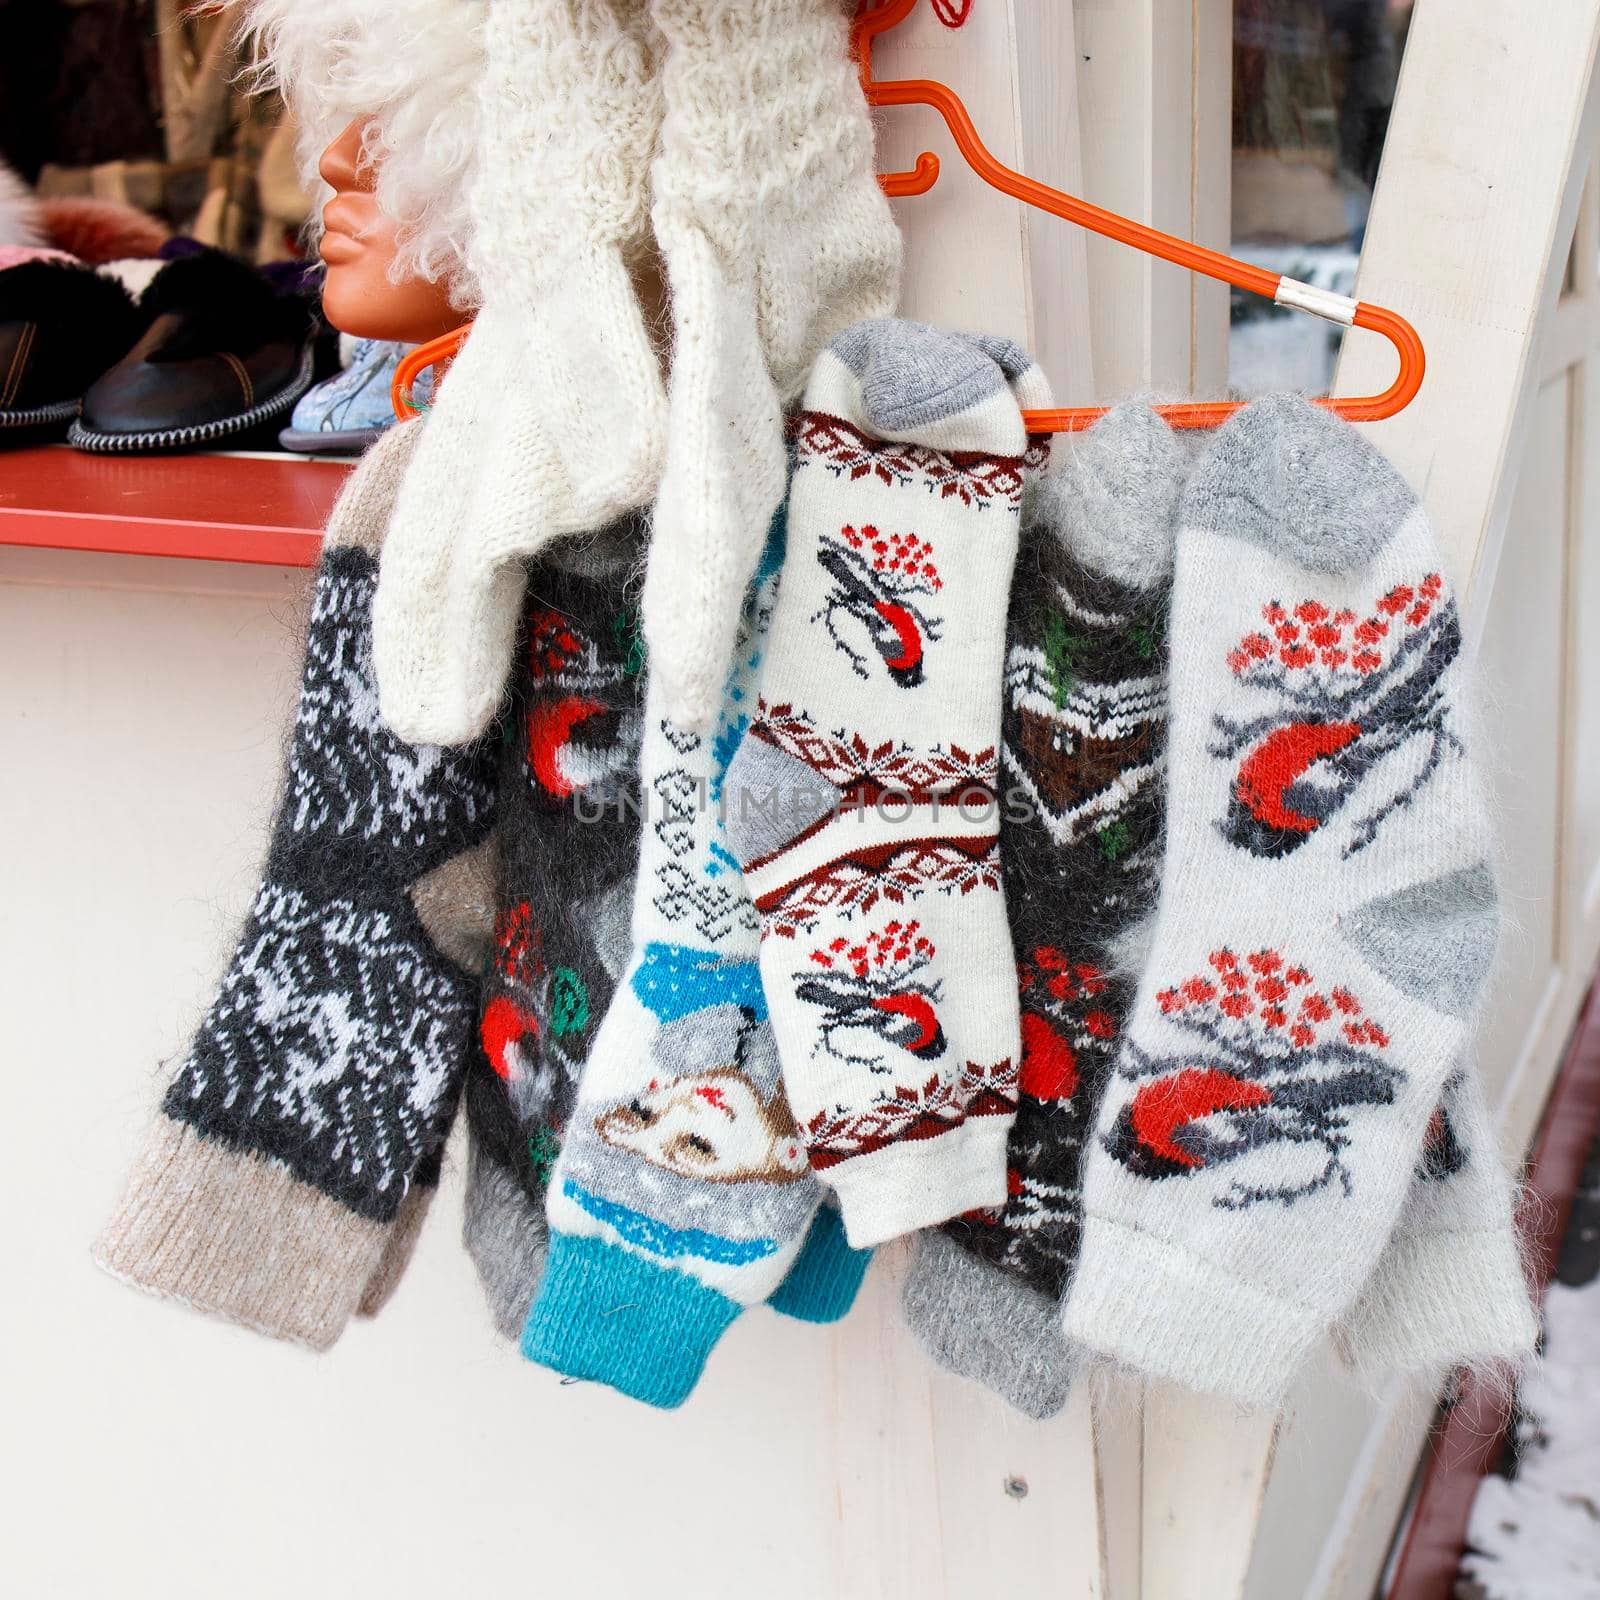 Traditional white woolen socks with knitted red bullfinches, snow maiden and deer for sale at a street market. by elenarostunova